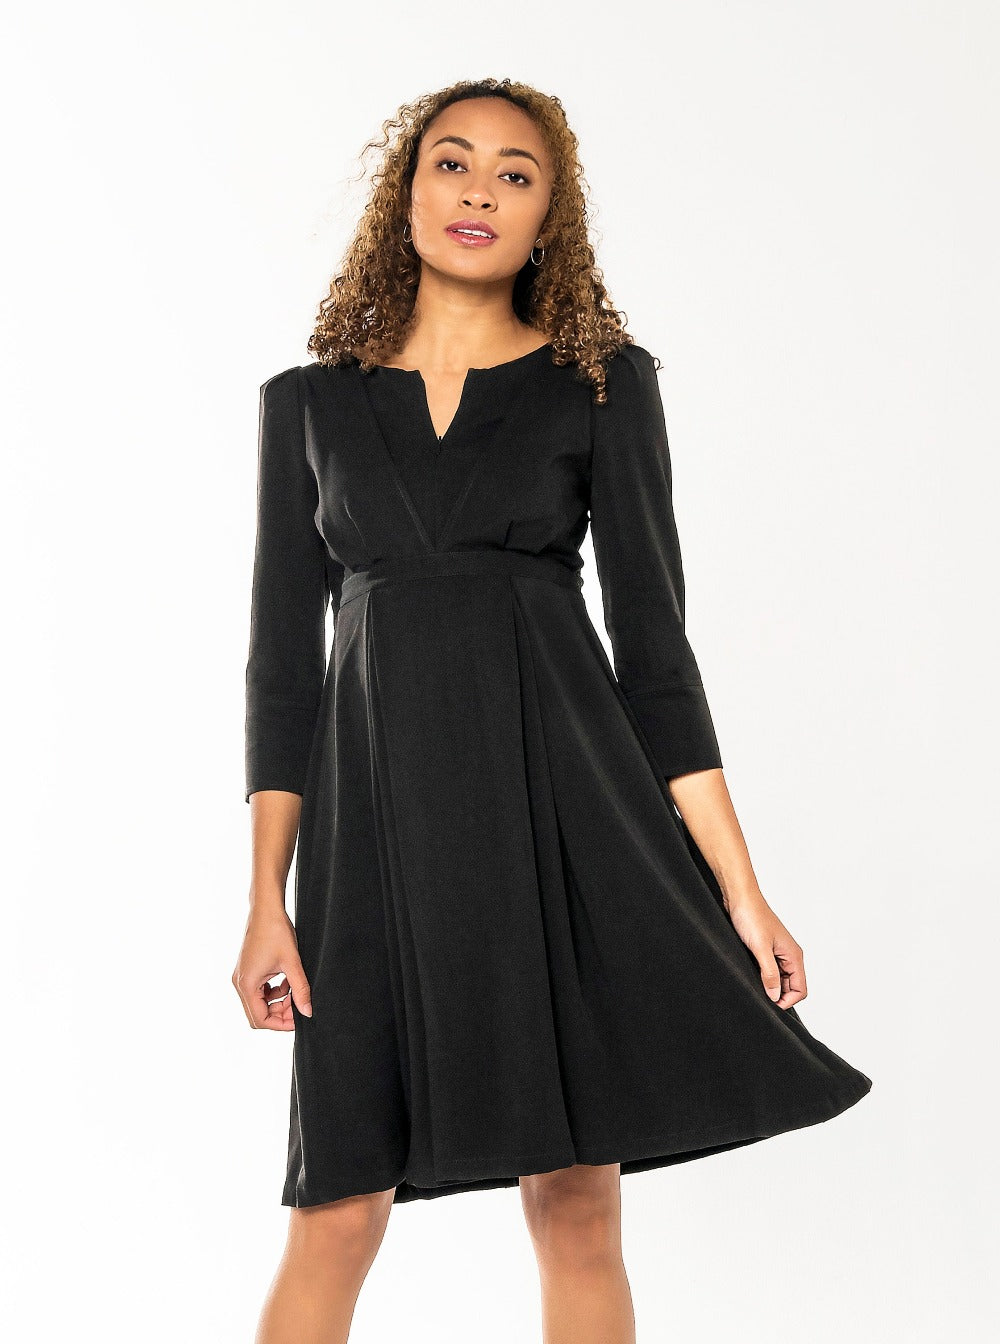 Black maternity and nursing dresses by MARION. Sustainable TENCEL empire waist style with deep pockets and full feminine skirt. Breastfeeding friendly with 3/4 sleeves and elegant cuff detail.